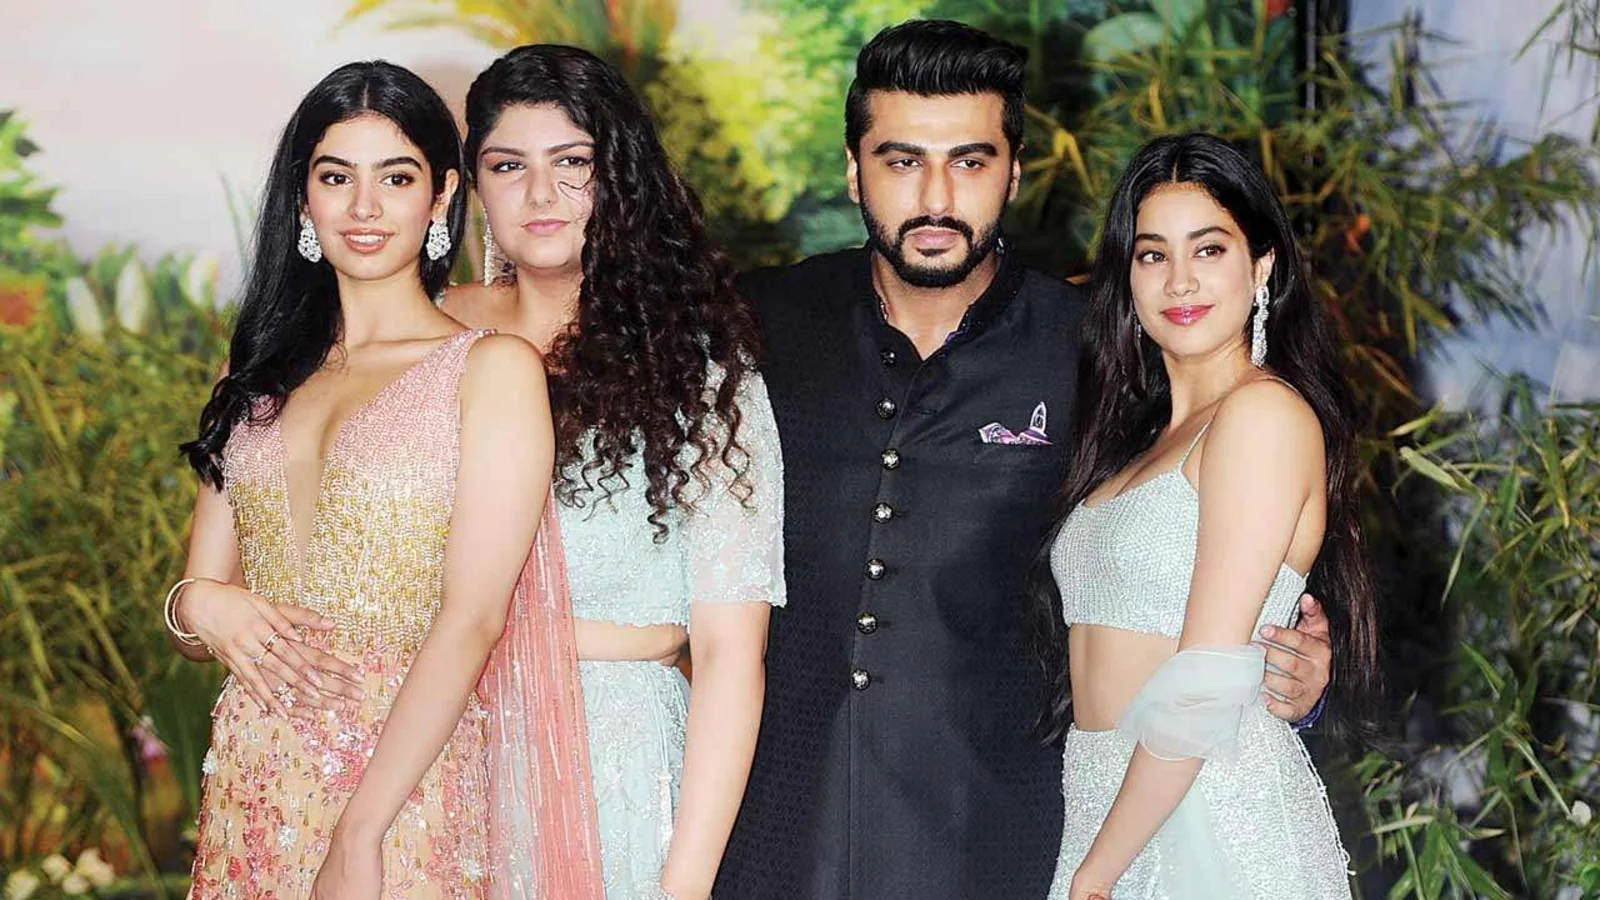 Janhvi Kapoor talks about gaining Arjun Kapoor, Anshula as siblings ‘at later stage in life’: ‘Who else can say that’